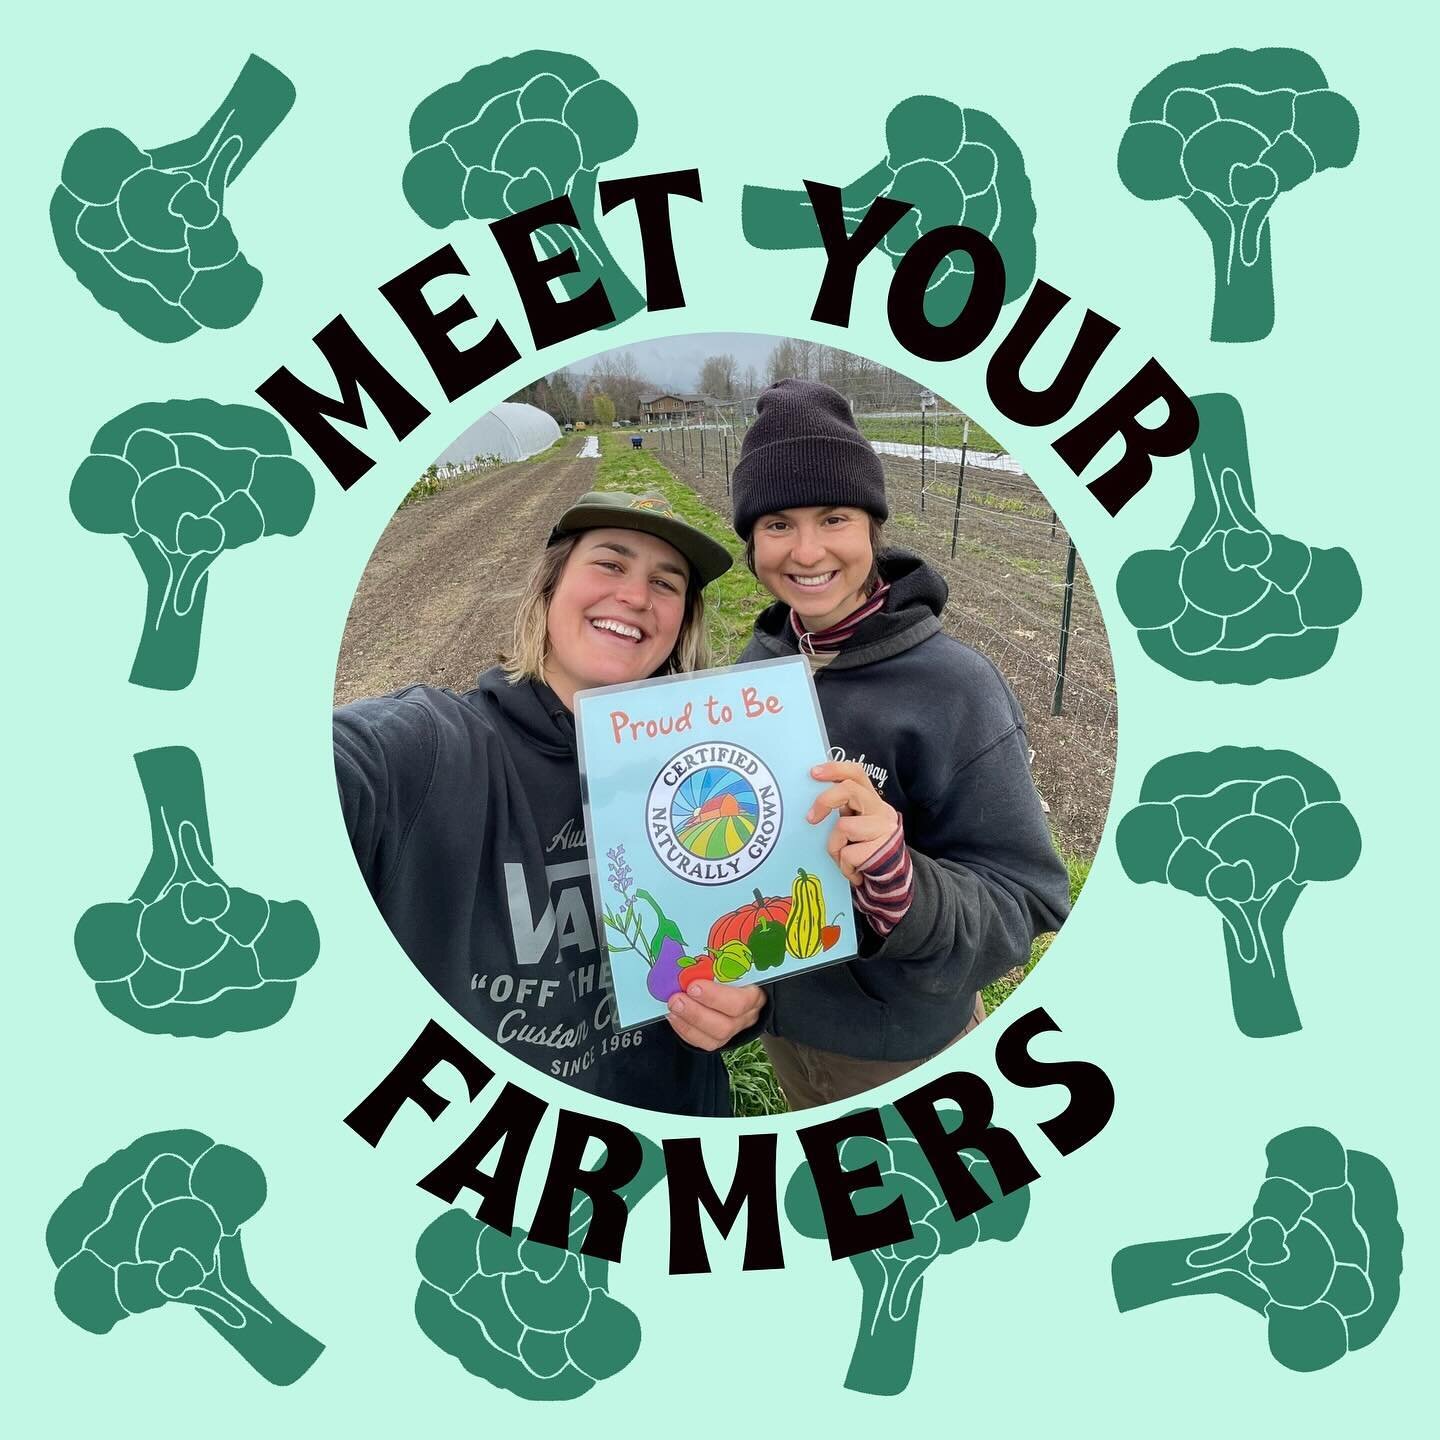 Hey it&rsquo;s Maddy and Emma and we&rsquo;re the dream team! We are two gals addicted to growing and talking about food! We can&rsquo;t wait to grow for you and get to know y&rsquo;all a little better 🤗 

🥕Sign up for our CSA with the link in our 